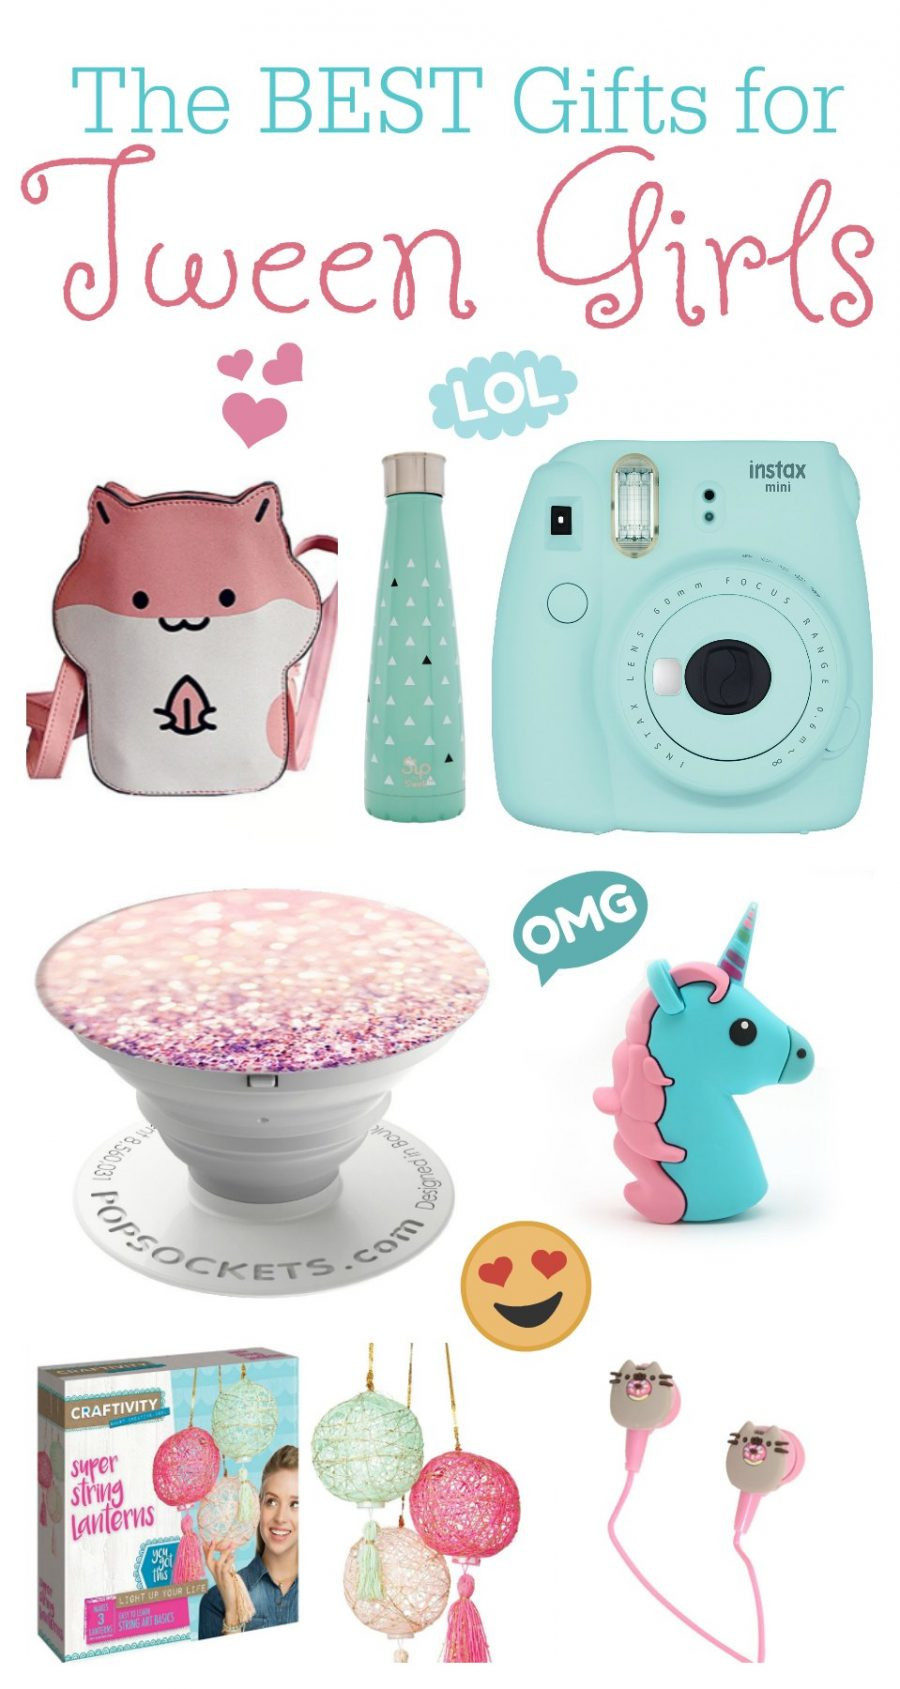 Top Gift Ideas For Girls
 The BEST Gift Ideas for Tween Girls